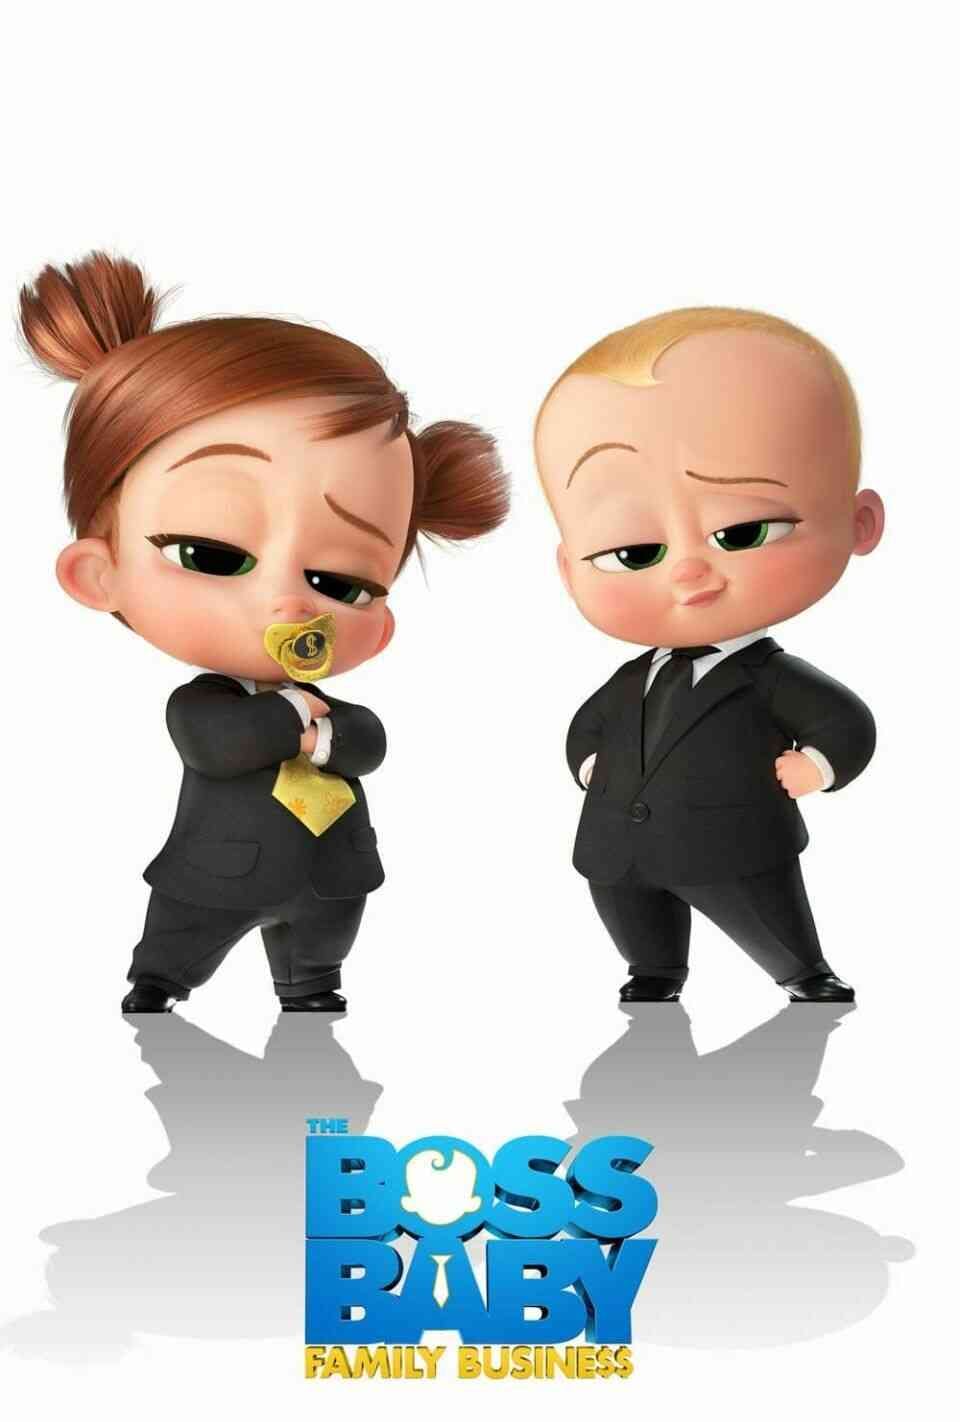 Read The Boss Baby screenplay (poster)